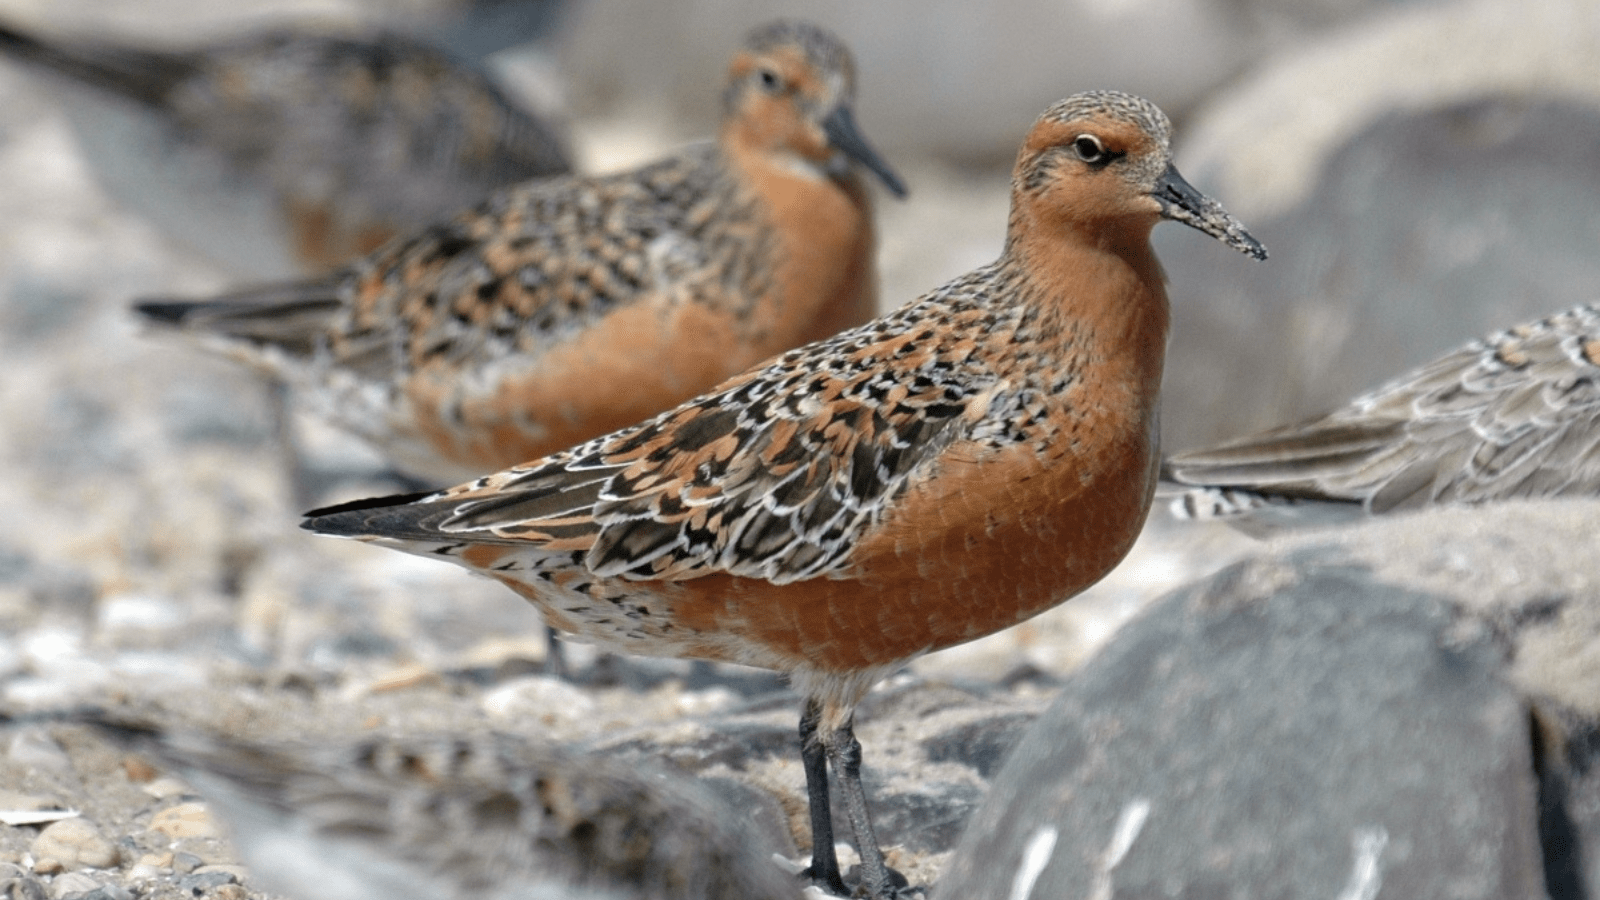 Red knots are common at and near Prime Hook National Wildlife Refuge in Delaware.